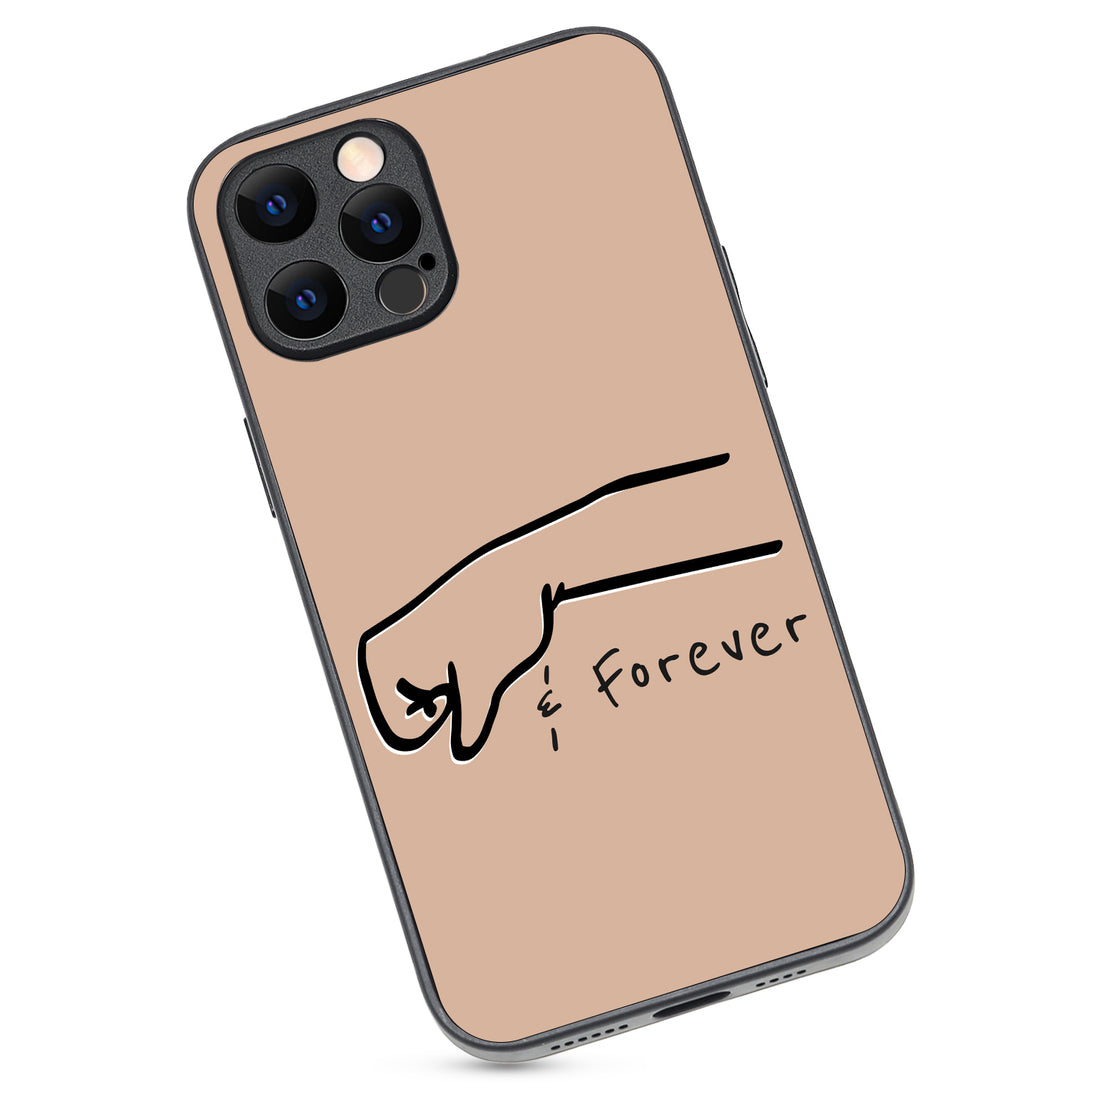 Forever Bff iPhone 12 Pro Max Case